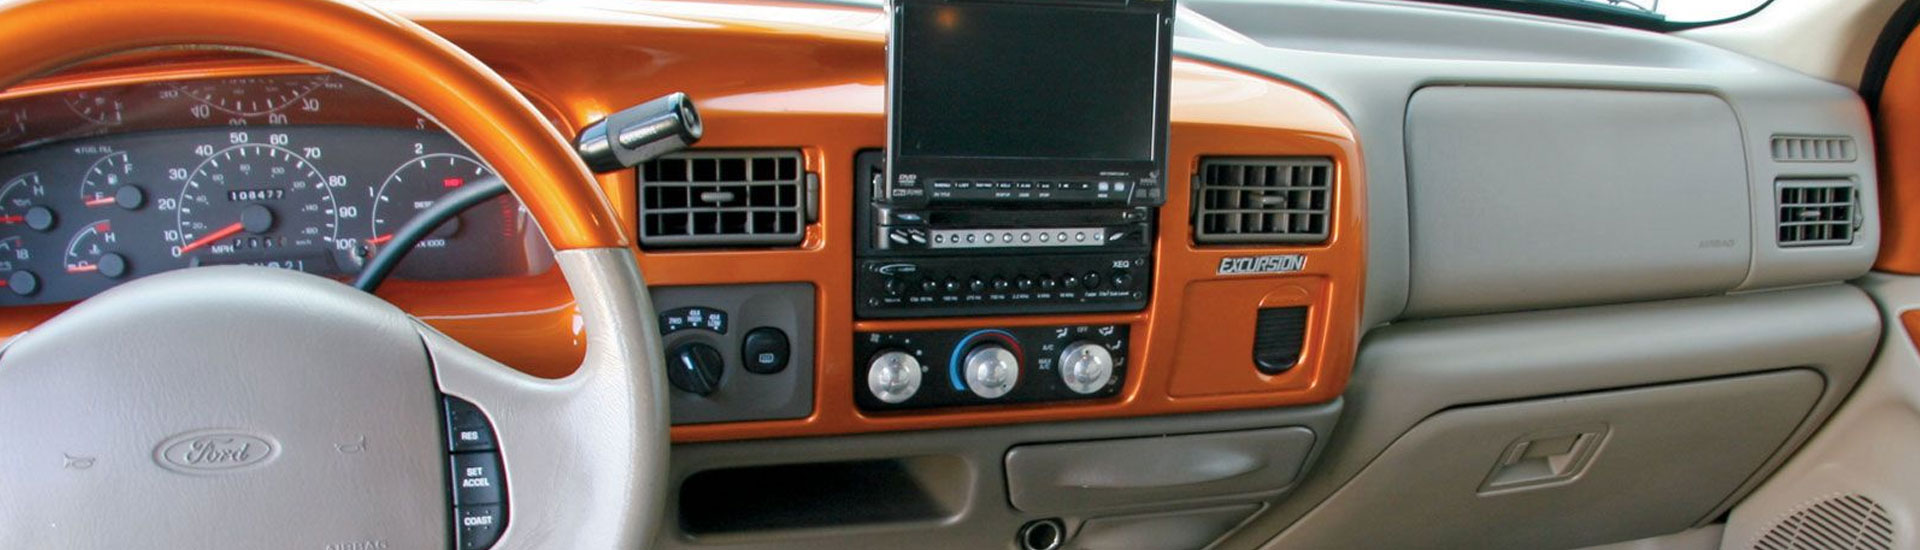 ford excursion interior panels